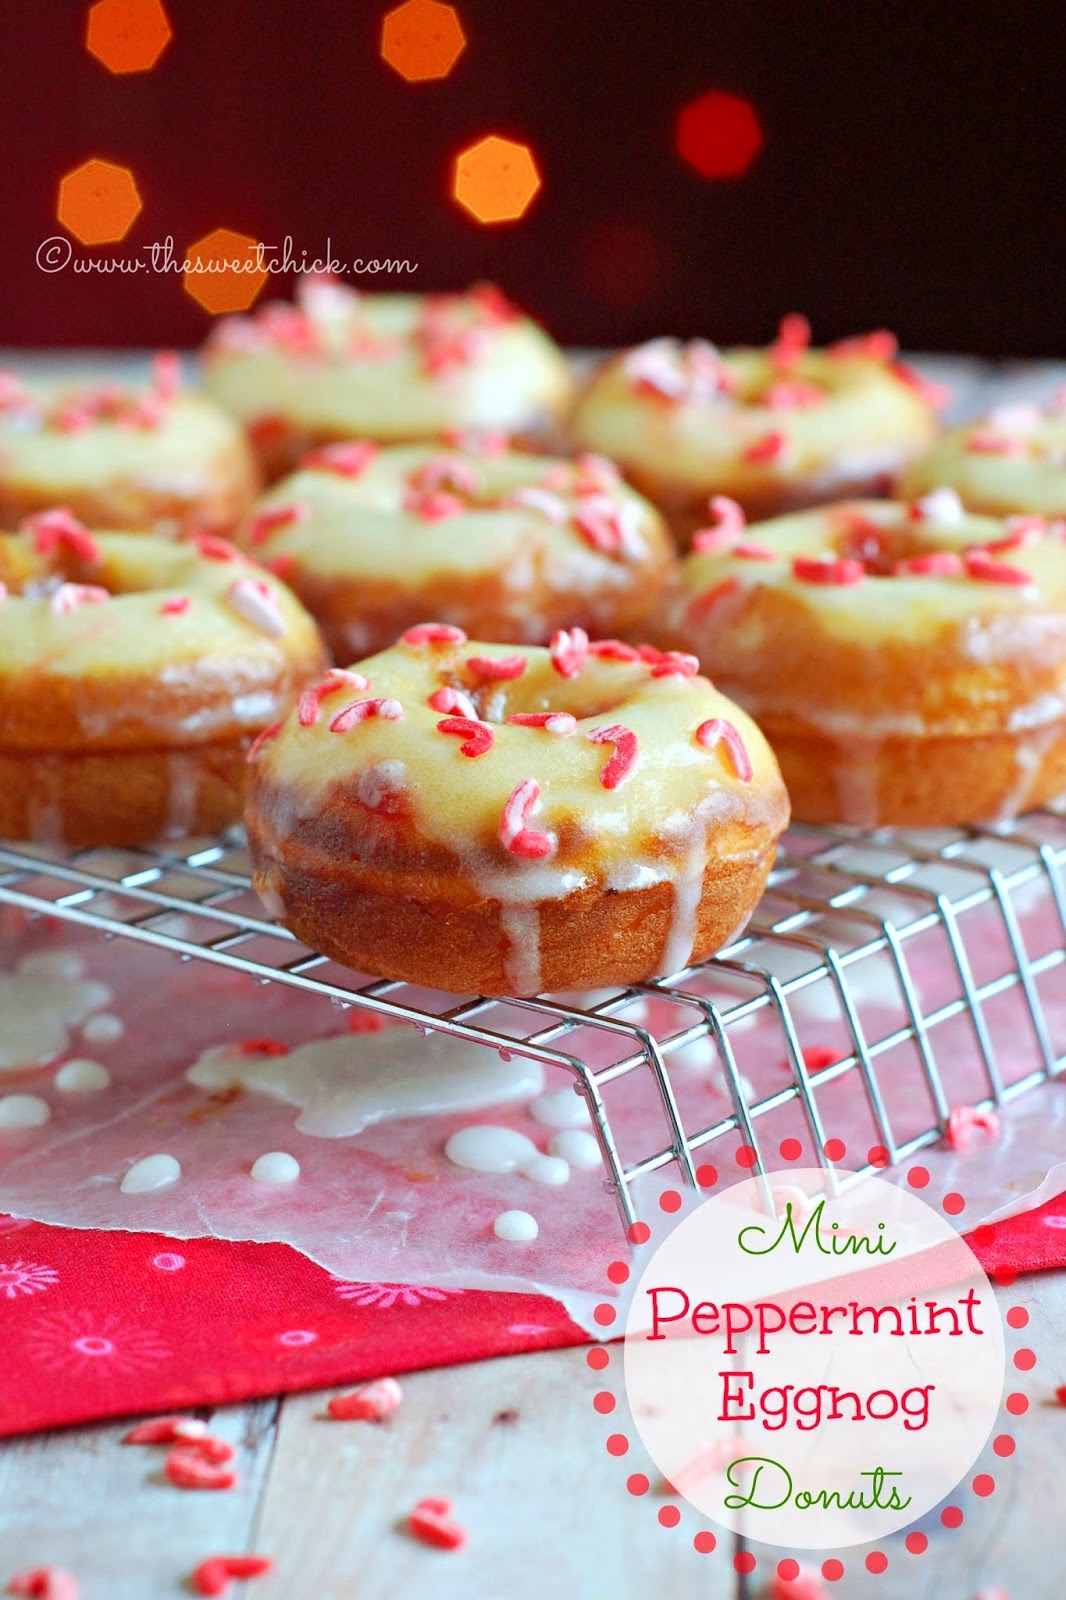 http://www.thesweetchick.com/2013/12/mini-peppermint-eggnog-donuts.html